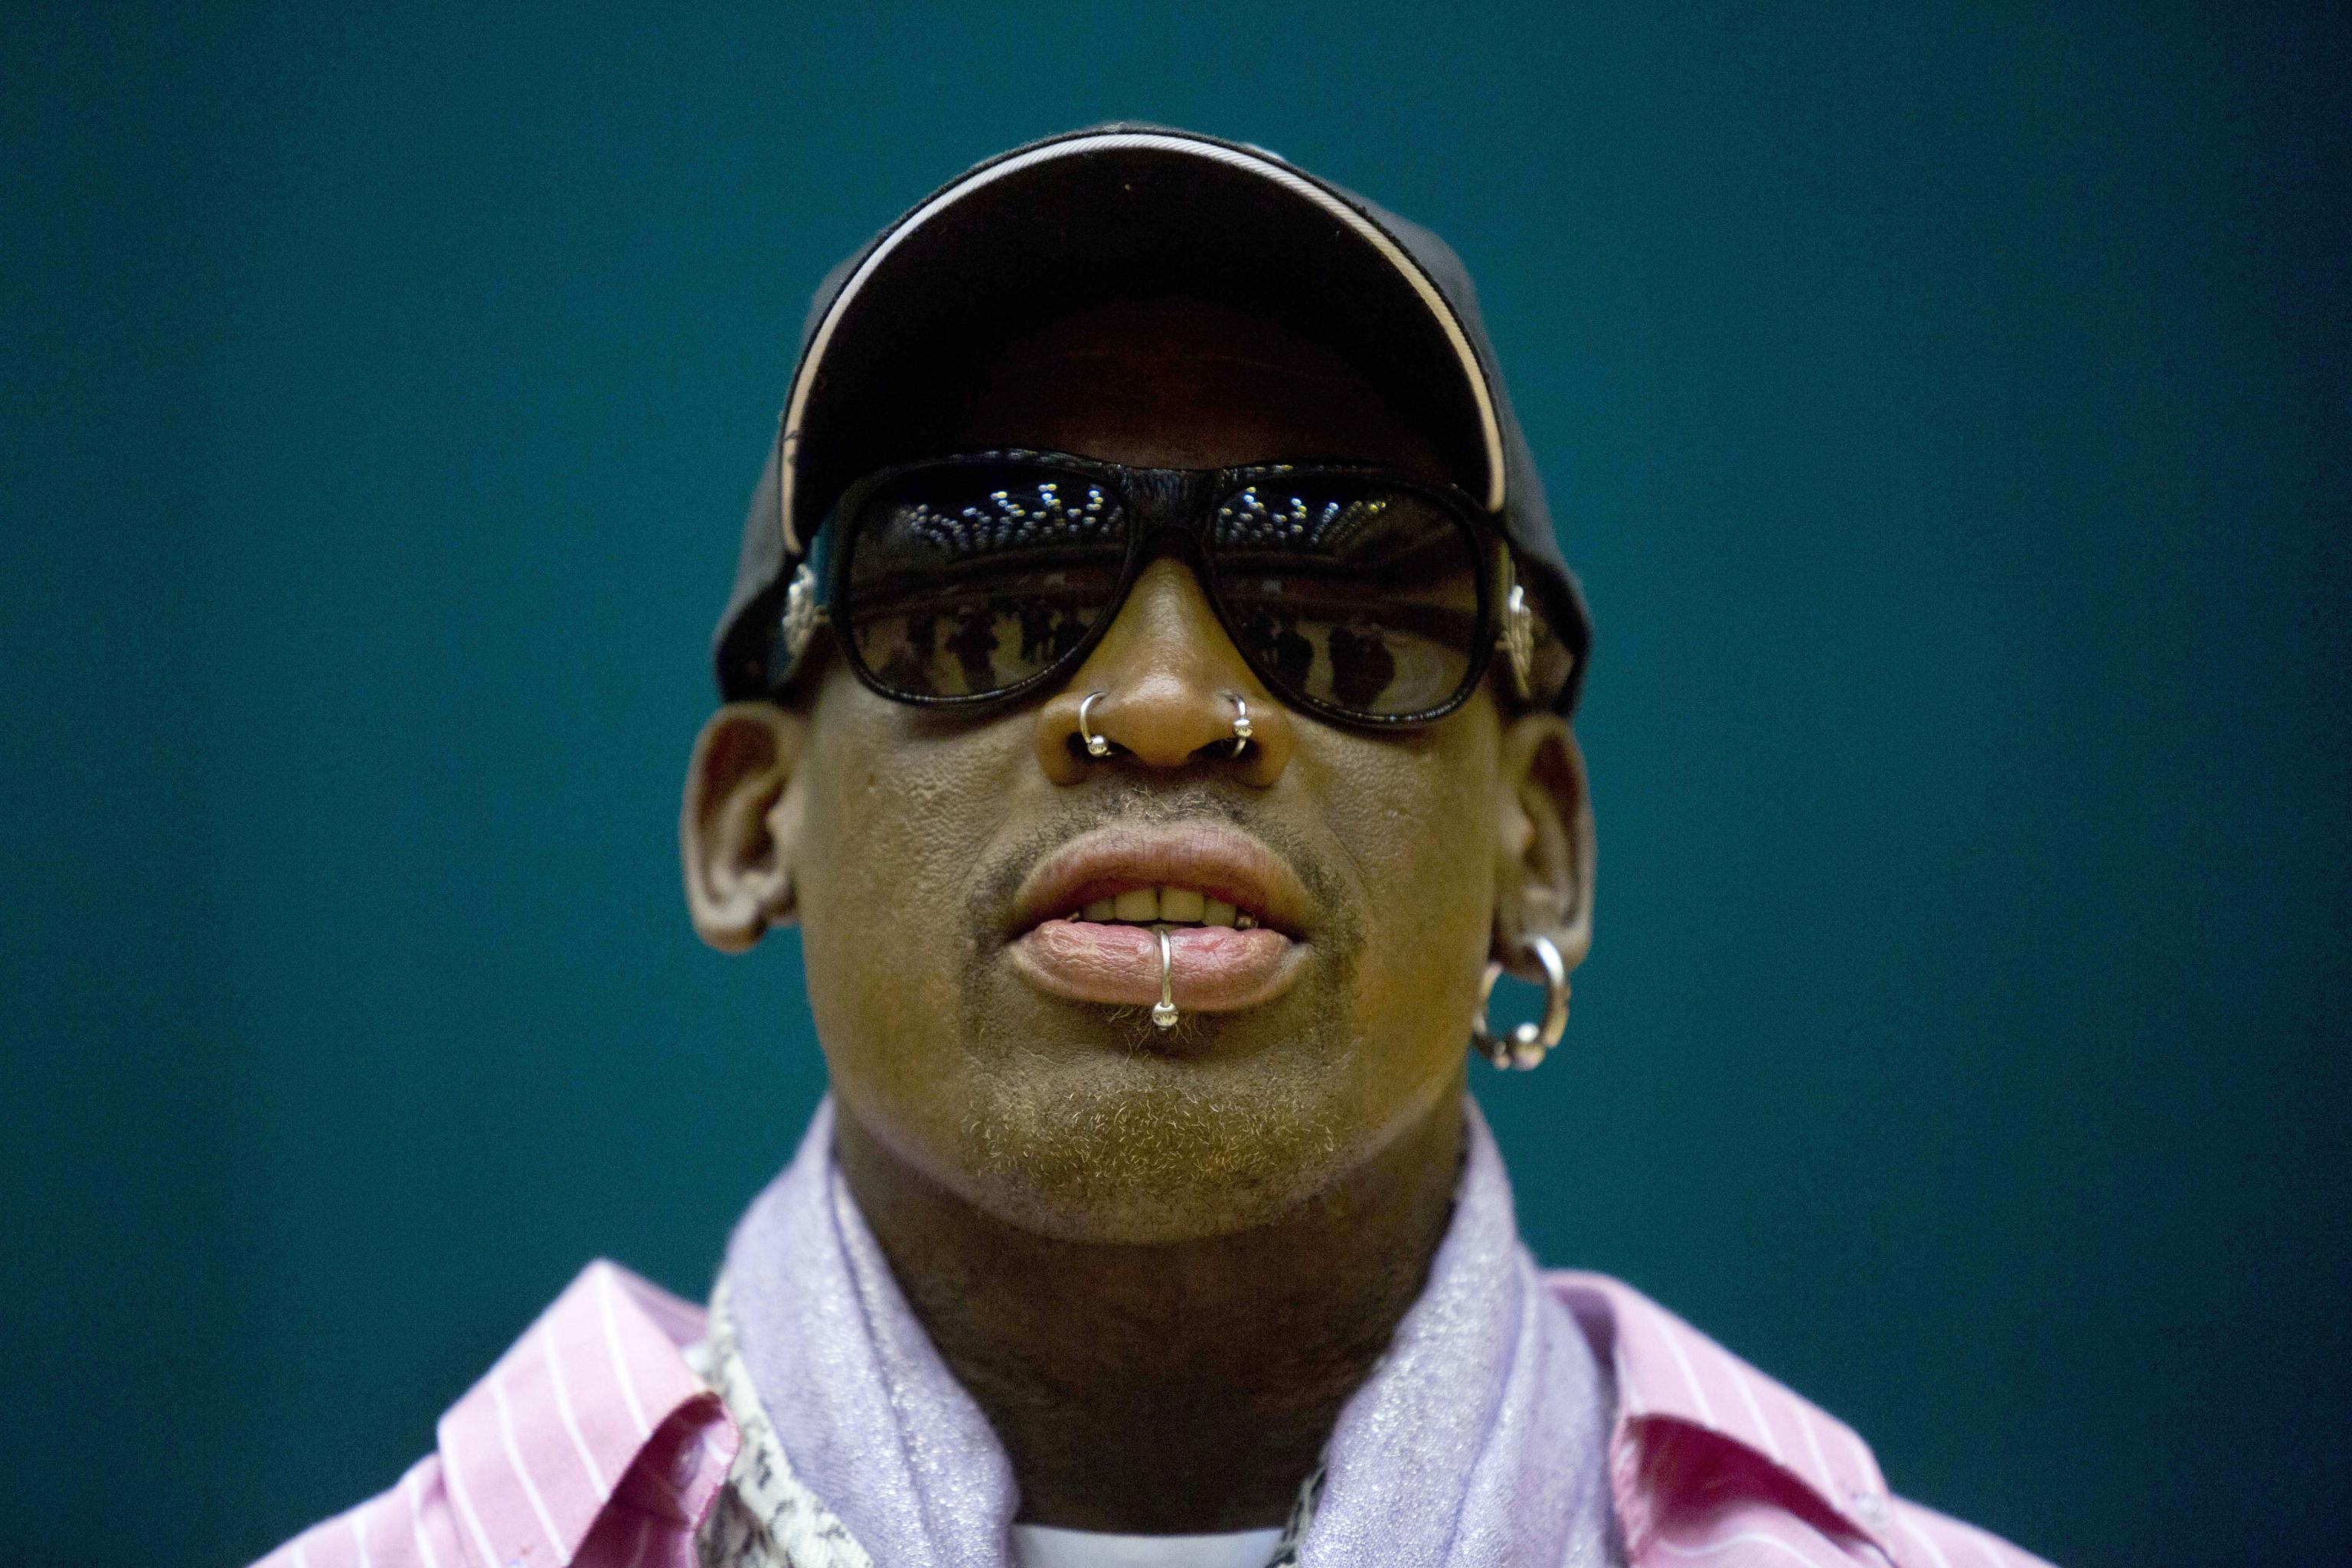 Dennis Rodman's 8 Most Outrageous Hairstyles Ranked